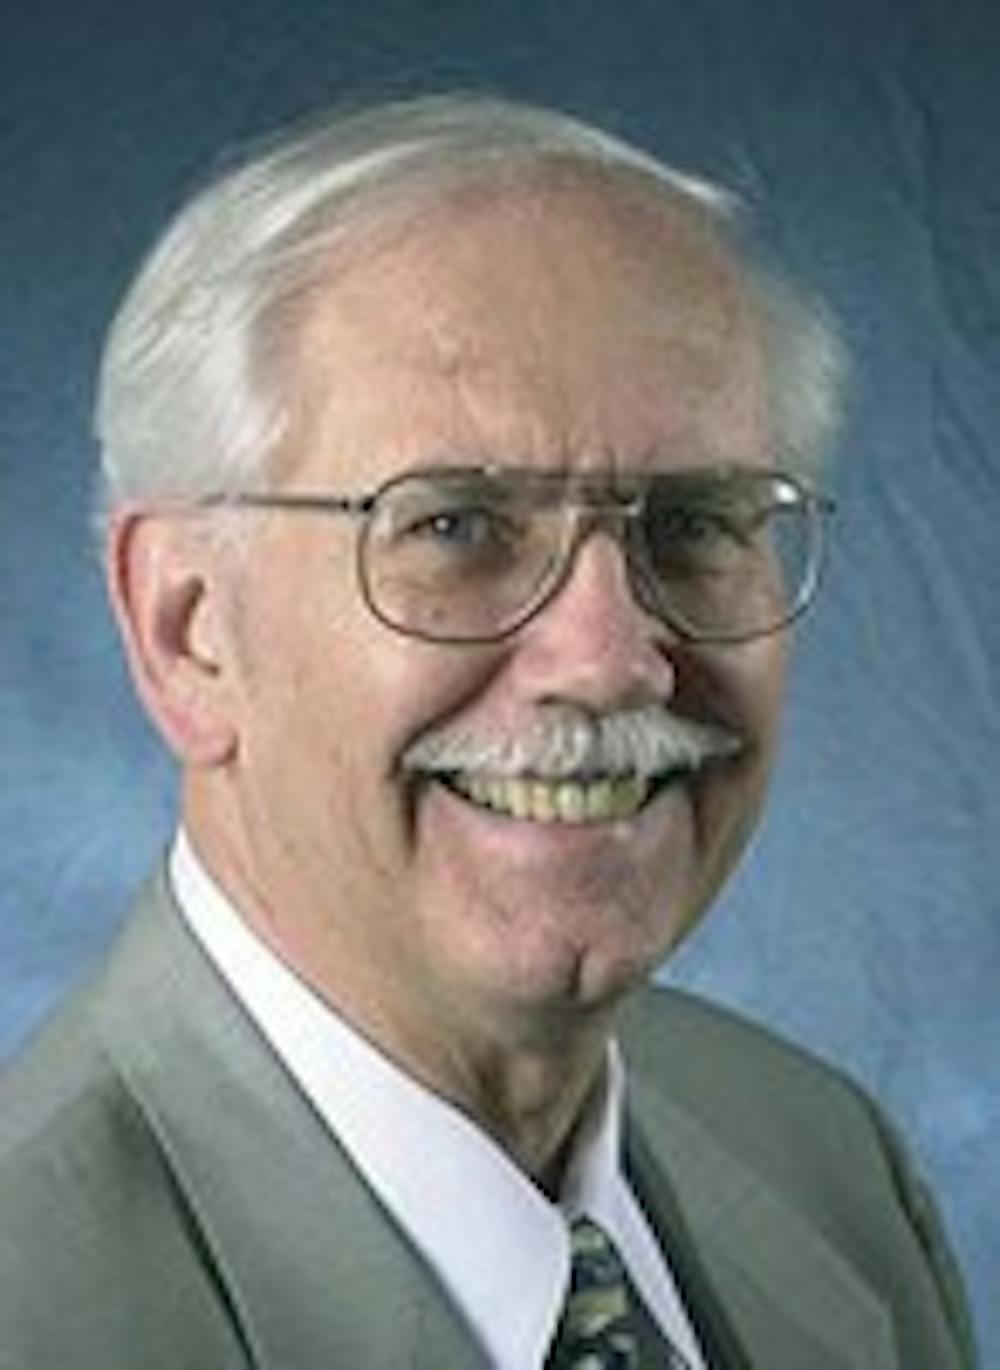 Bruce Carney was named provost after a search found no other match.